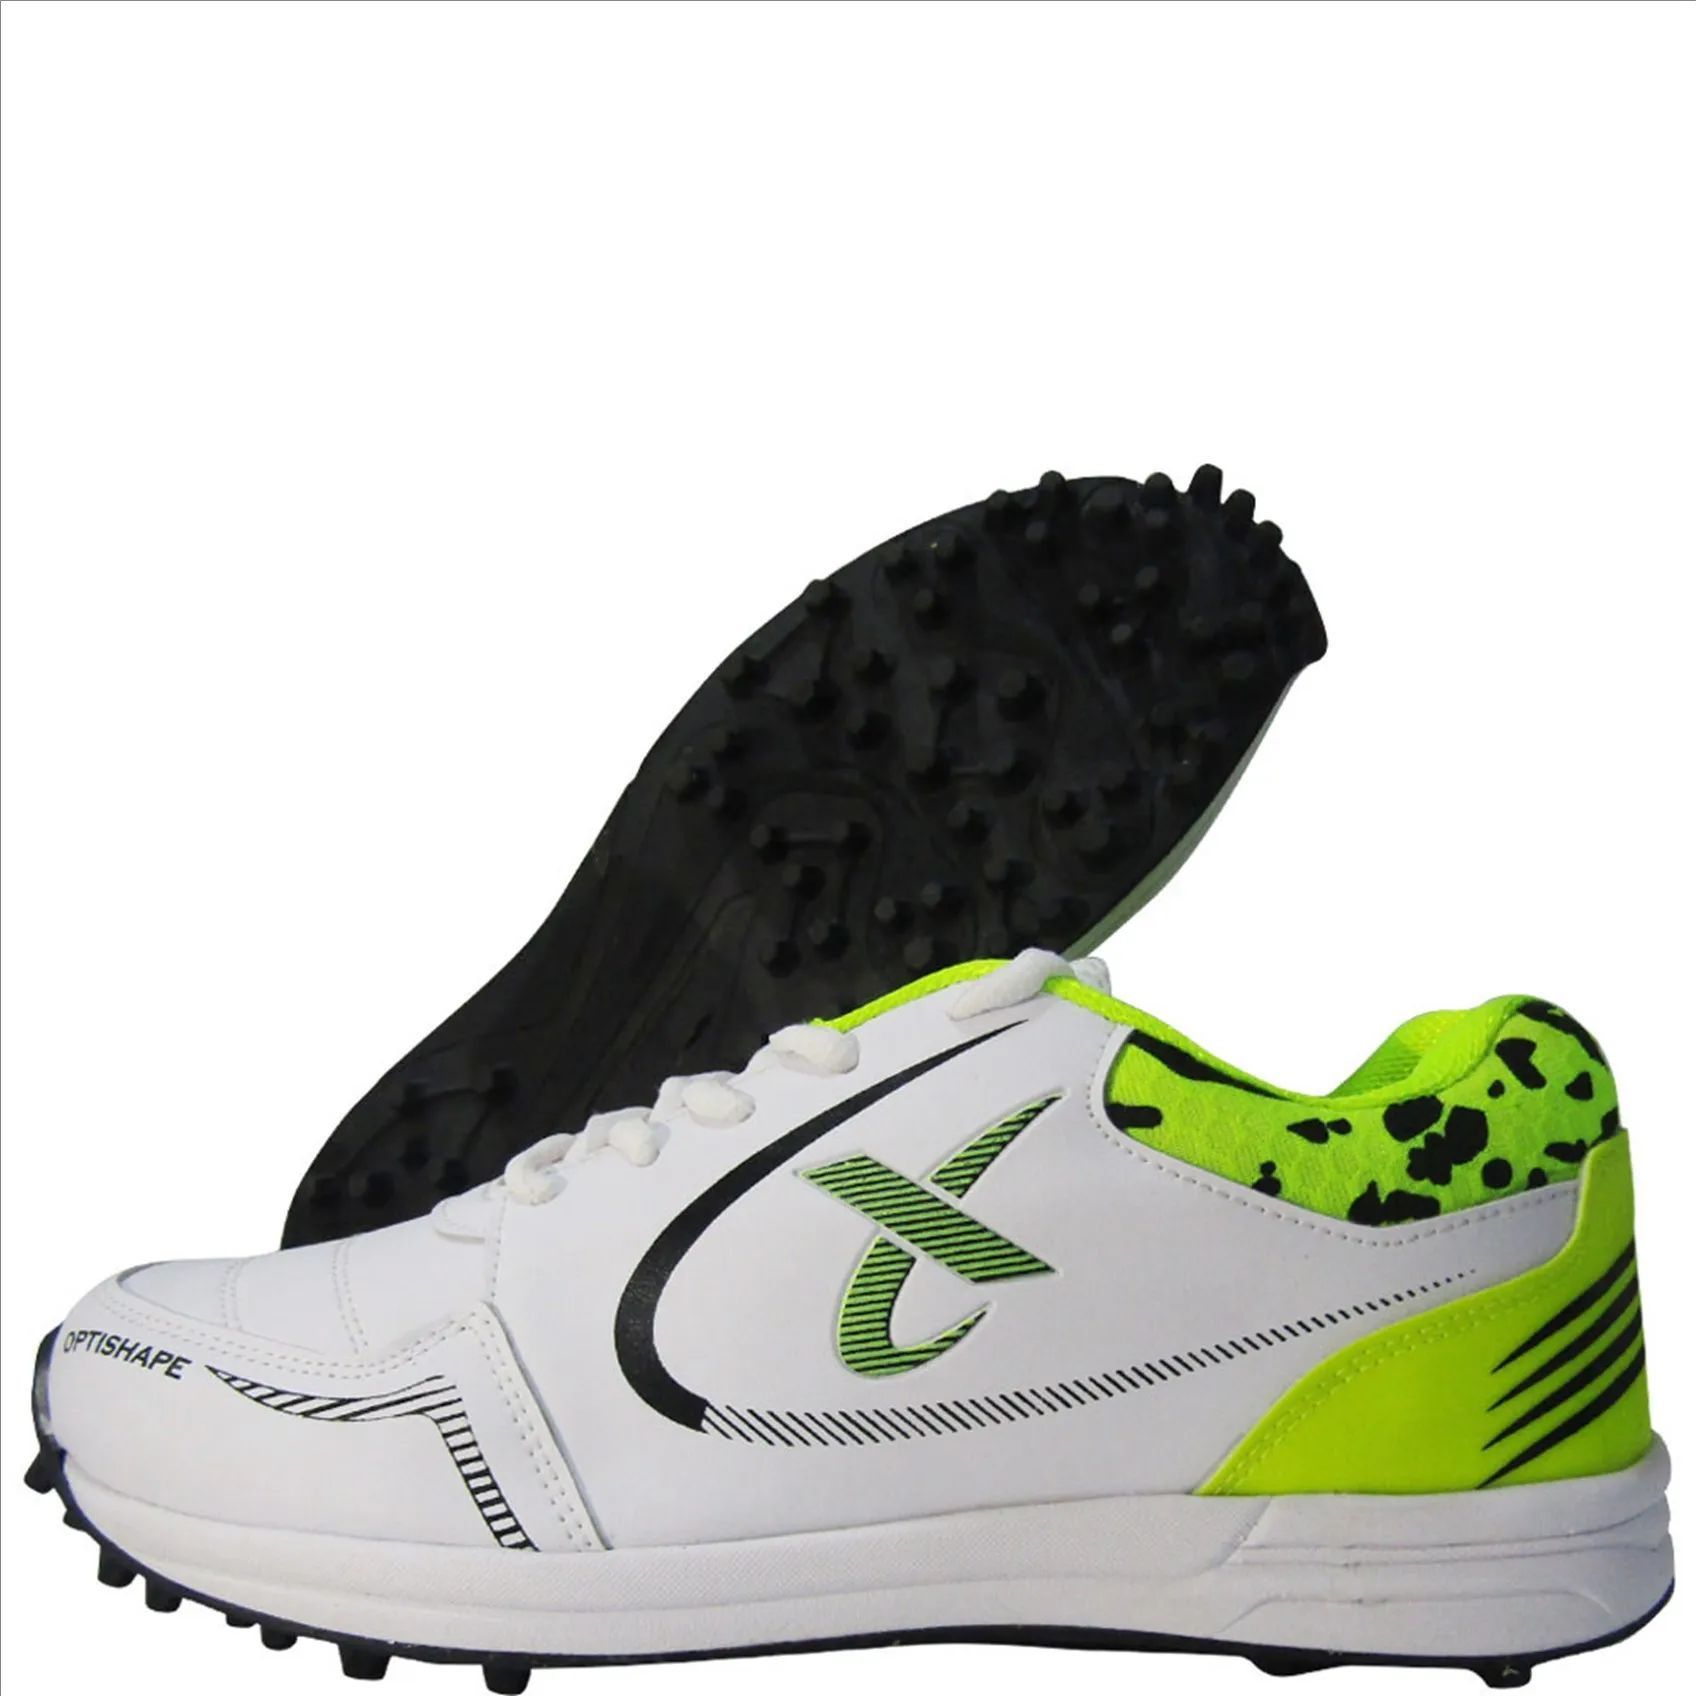 Thrax Court Power 008 Badminton Shoes Yellow and Black Buy Thrax Court  Power 008 Badminton Shoes Yellow and Black Online at Lowest Prices in India